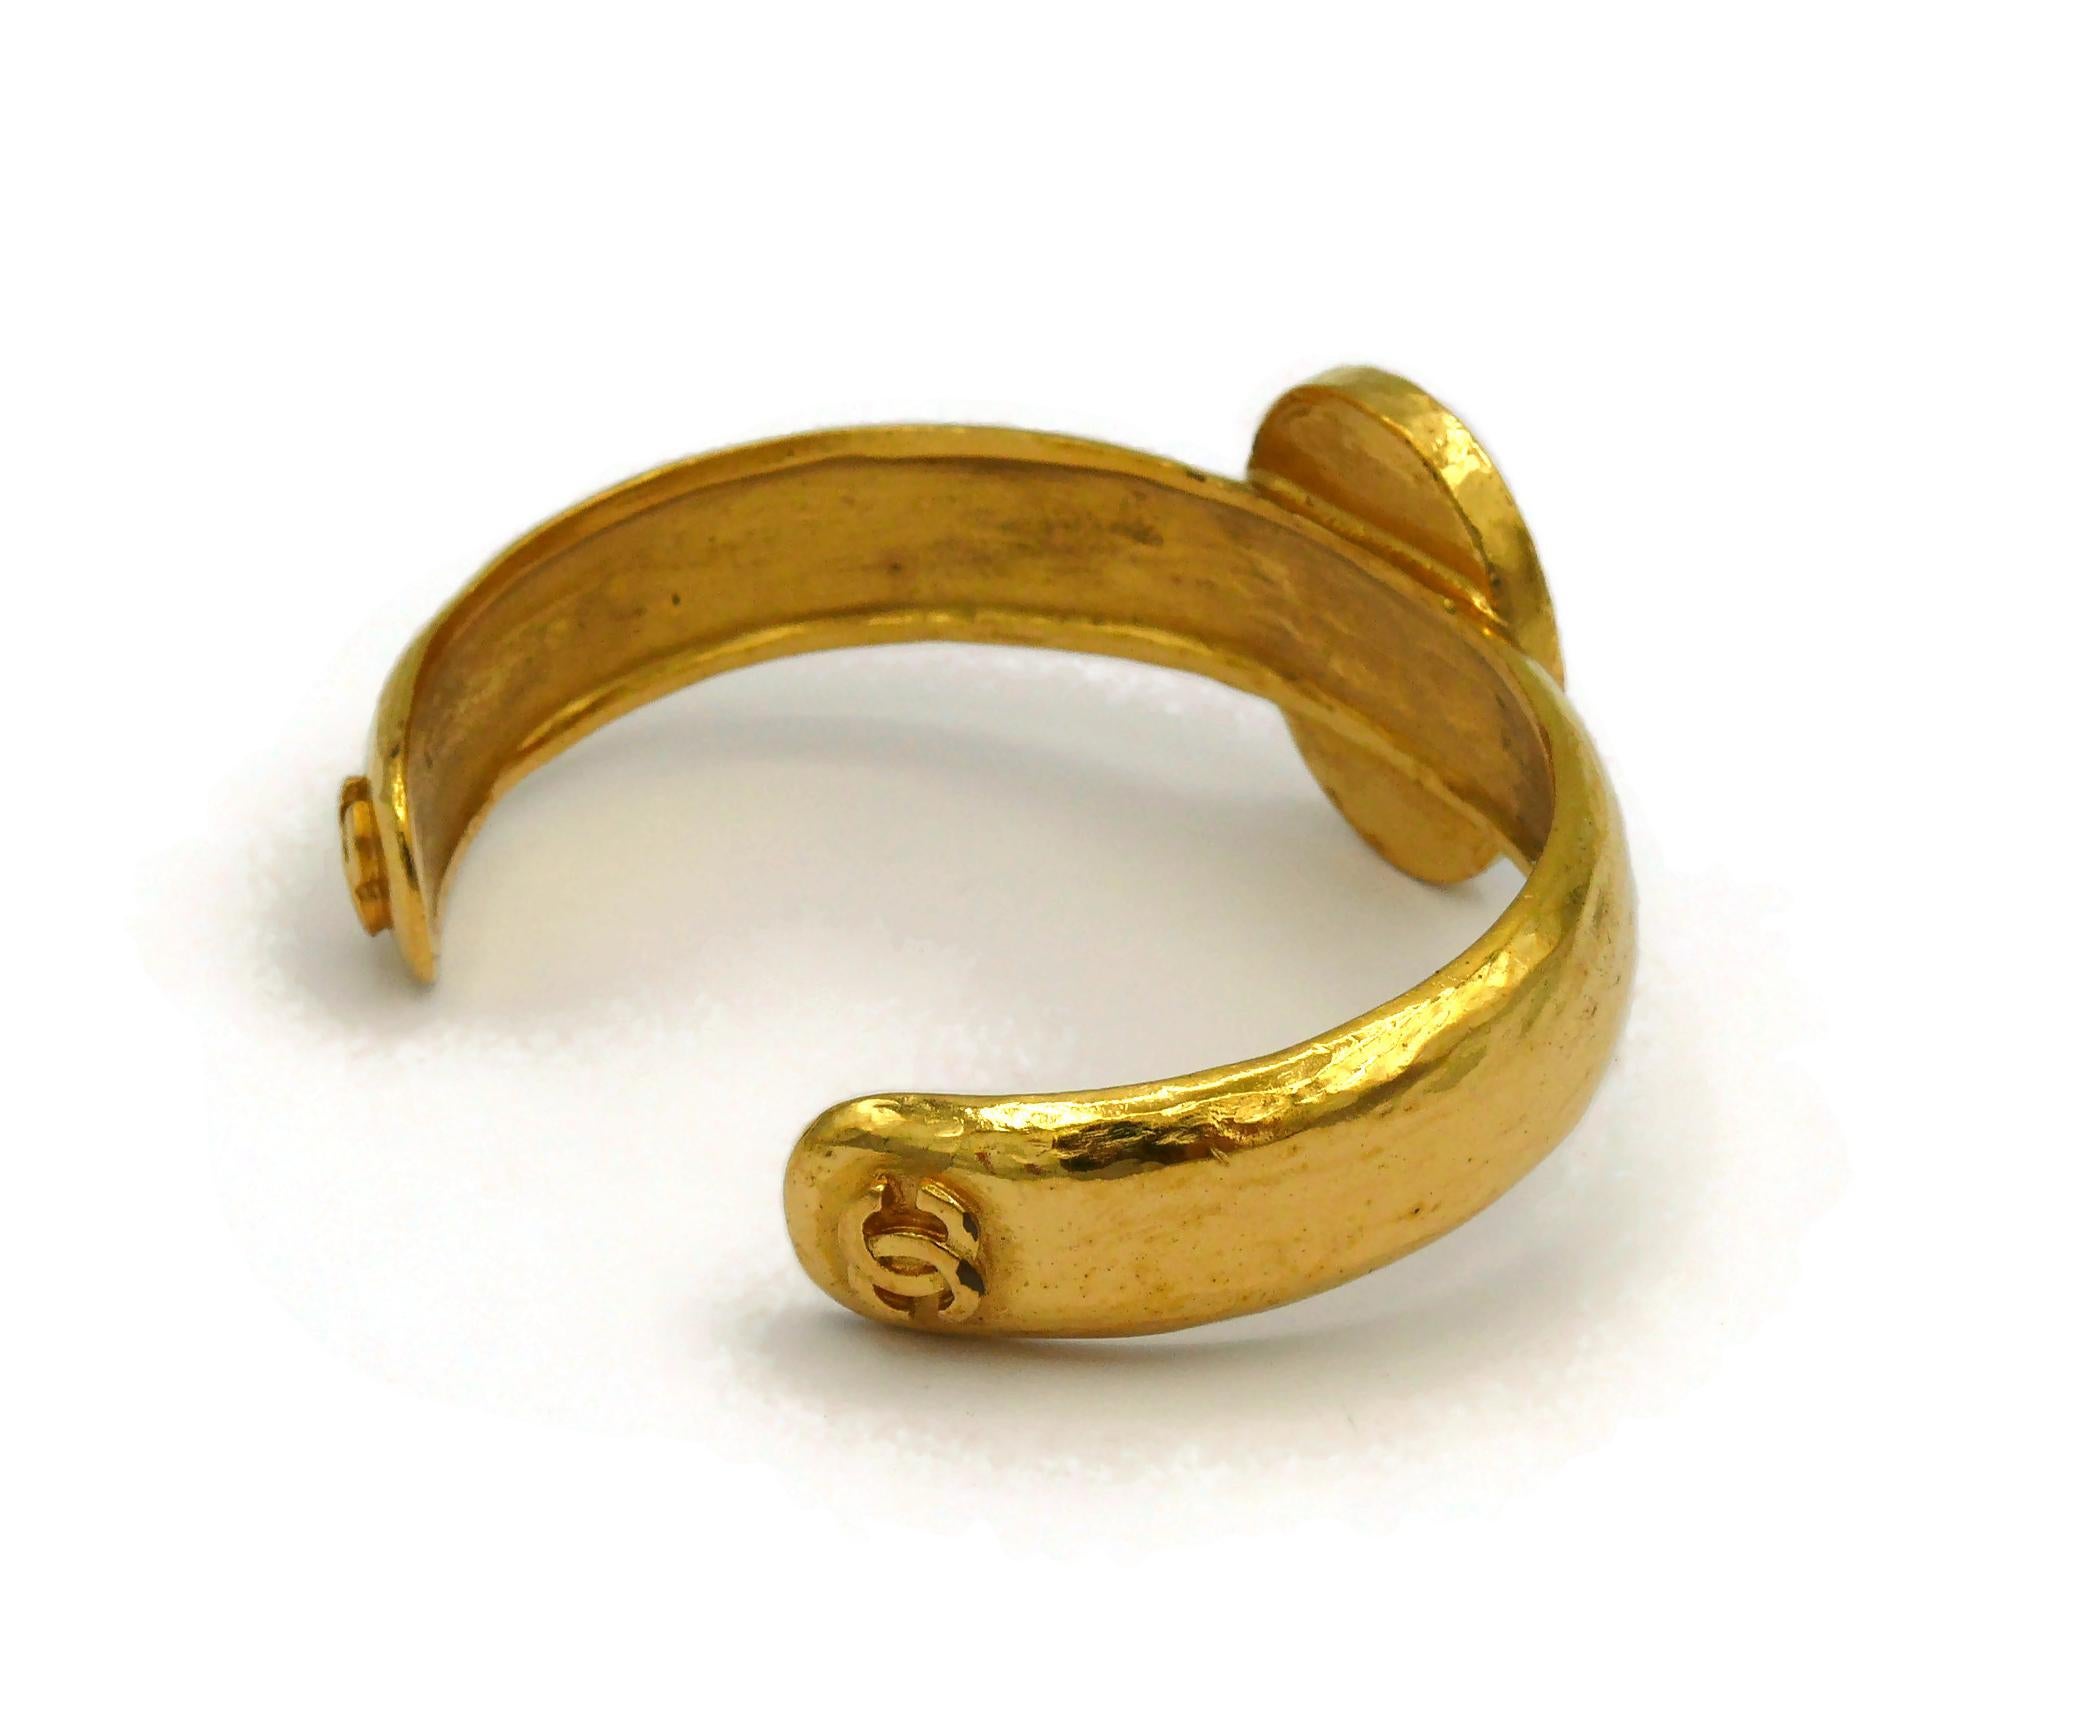 CHANEL by KARL LAGERFELD Vintage Gold Tone Blue Stone Bangle Bracelet, Fall 1996 For Sale 2